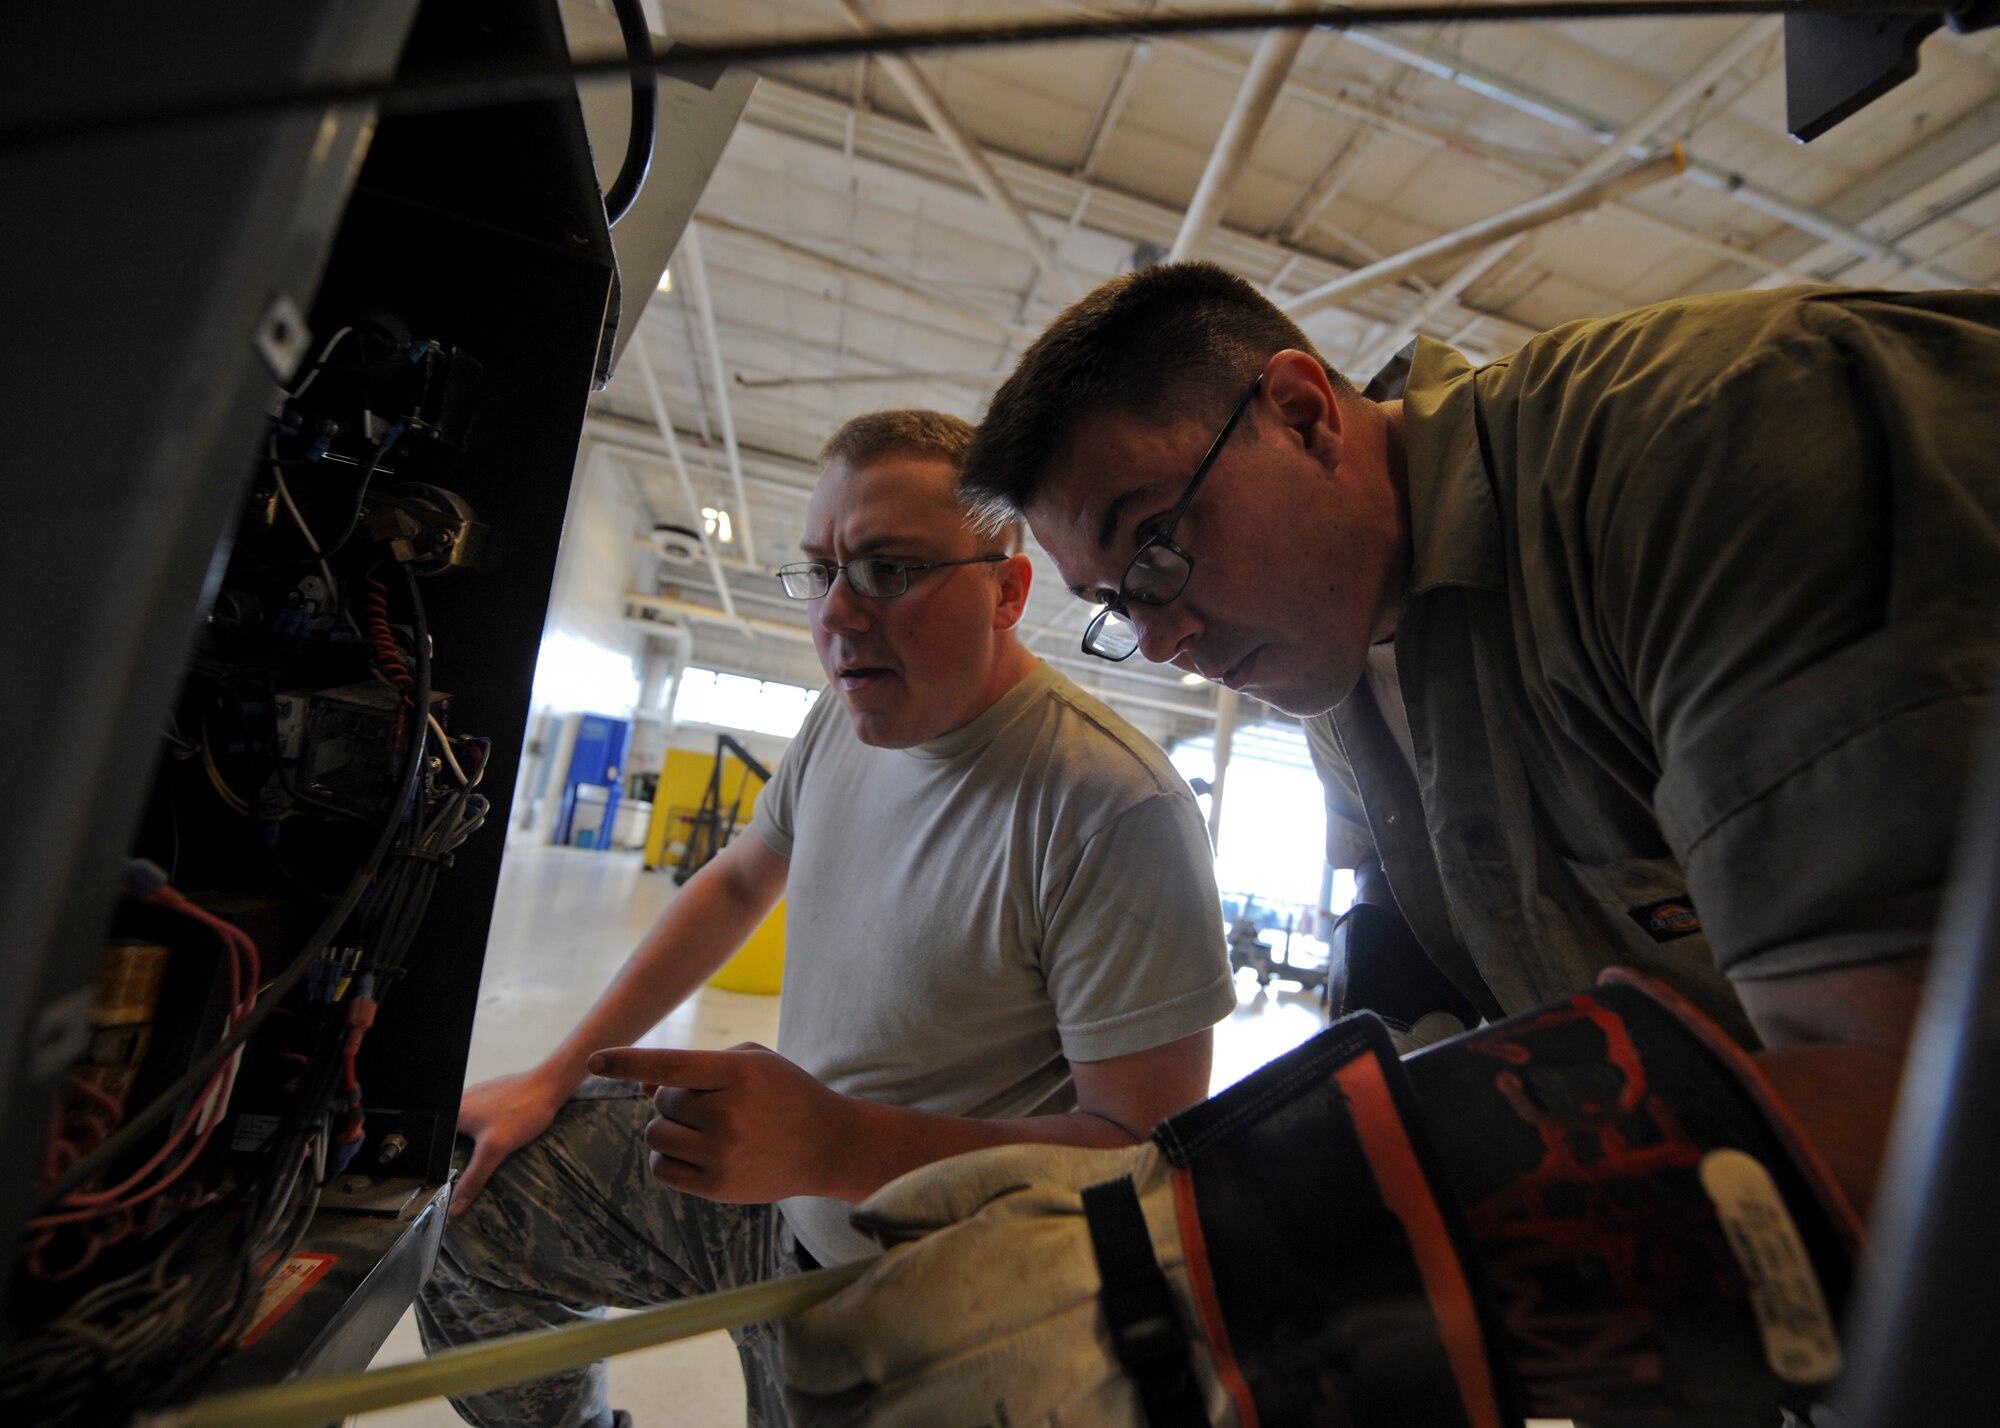 Senior Airmen James Copeland, left, and Joshua Farr, 22nd Maintenance Squadron aerospace ground equipment flight journeymen, check the voltage of a capacitor in a flood light cart, Nov. 5, 2015, at McConnell Air Force Base, Kan. The AGE flight provides the rest of the 22nd Maintenance Group with the equipment needed to troubleshoot any issues on the KC-135 Stratotanker that requires power or heating while on the ground. (U.S. Air Force photo/Senior Airman Victor J. Caputo)